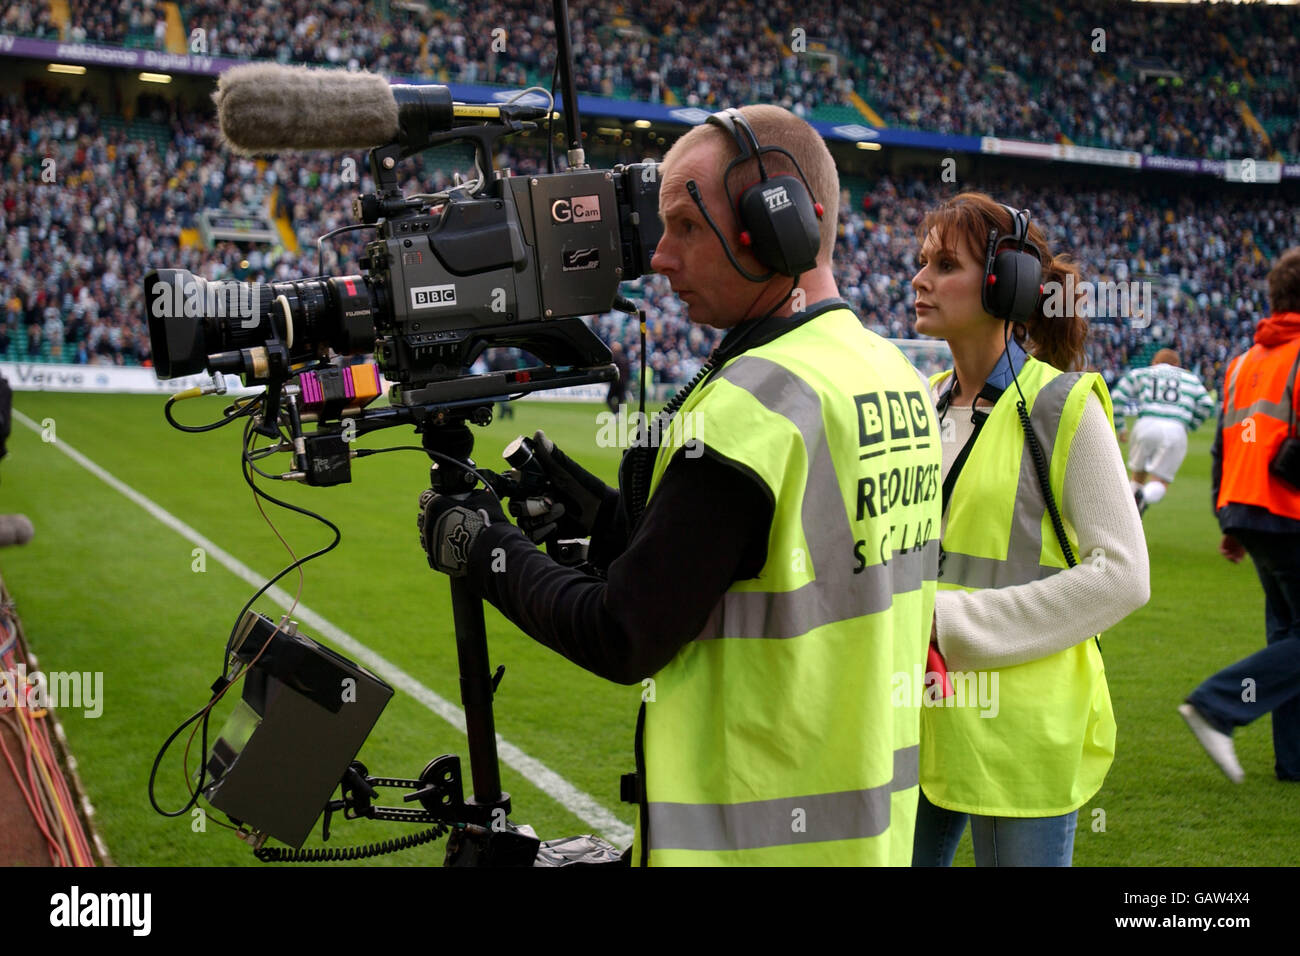 Soccer - Bank of Scotland Premier League - Celtic v Dundee. A BBC cameraman waits for the Celtic and Dundee players to emerge Stock Photo